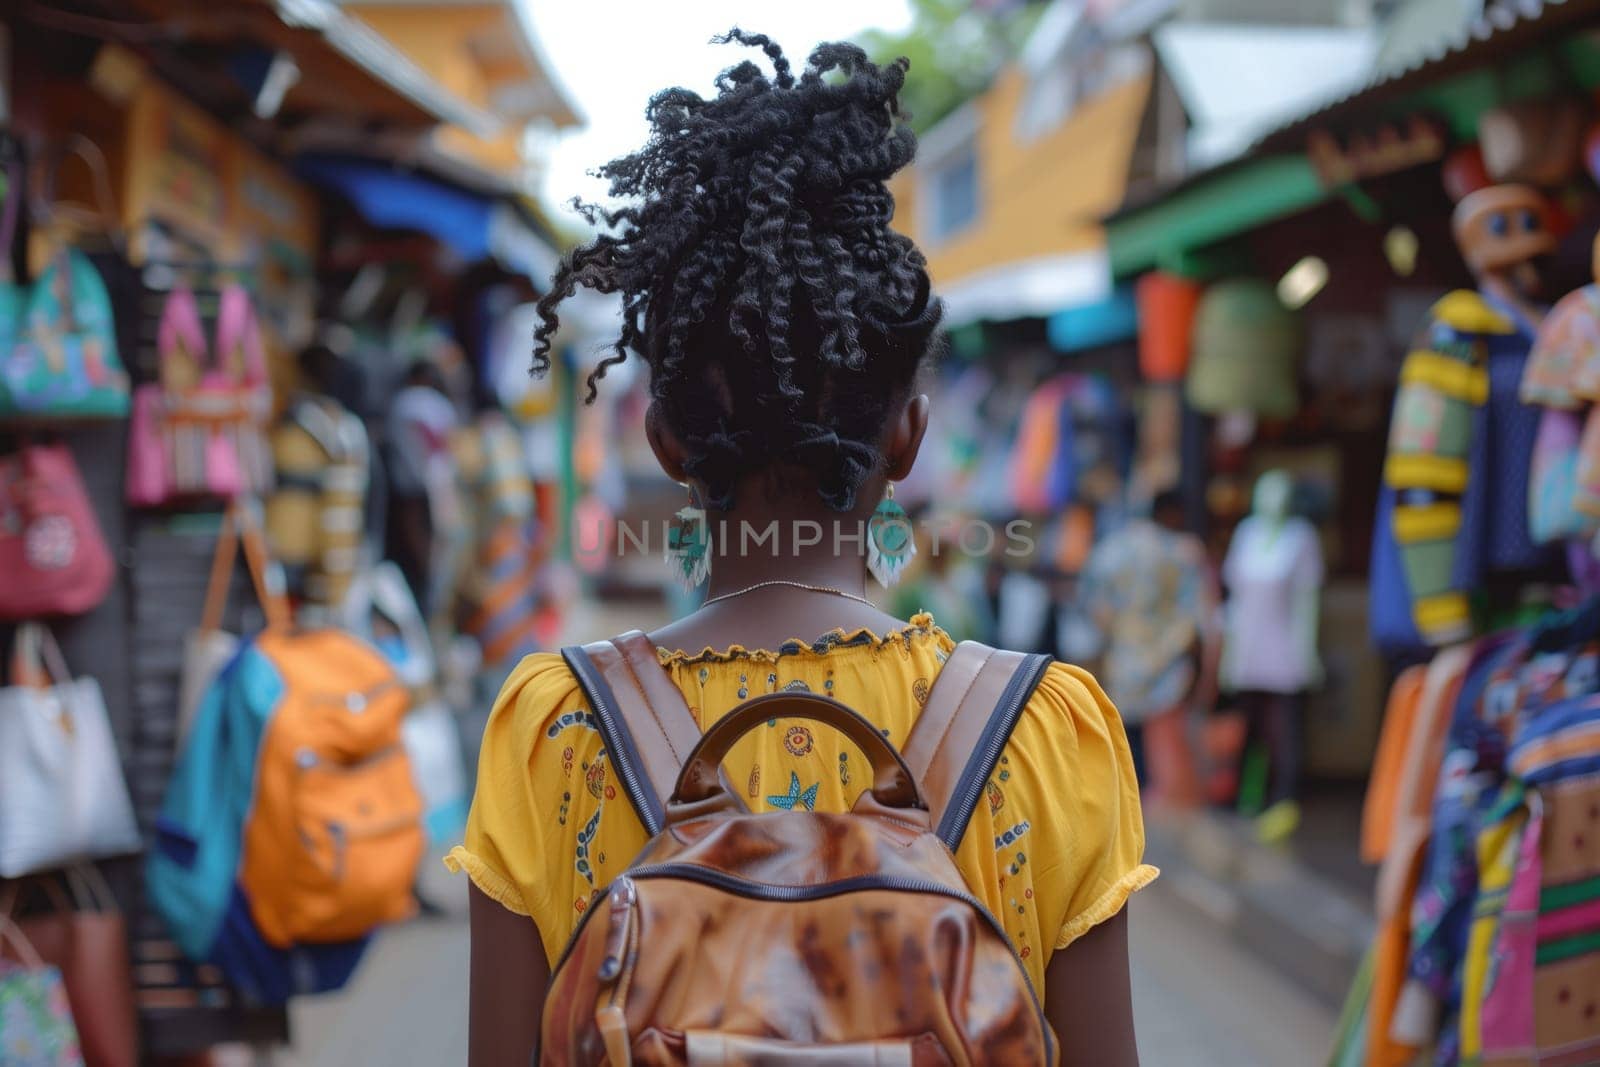 A woman with a backpack shopping at a busy market street by richwolf